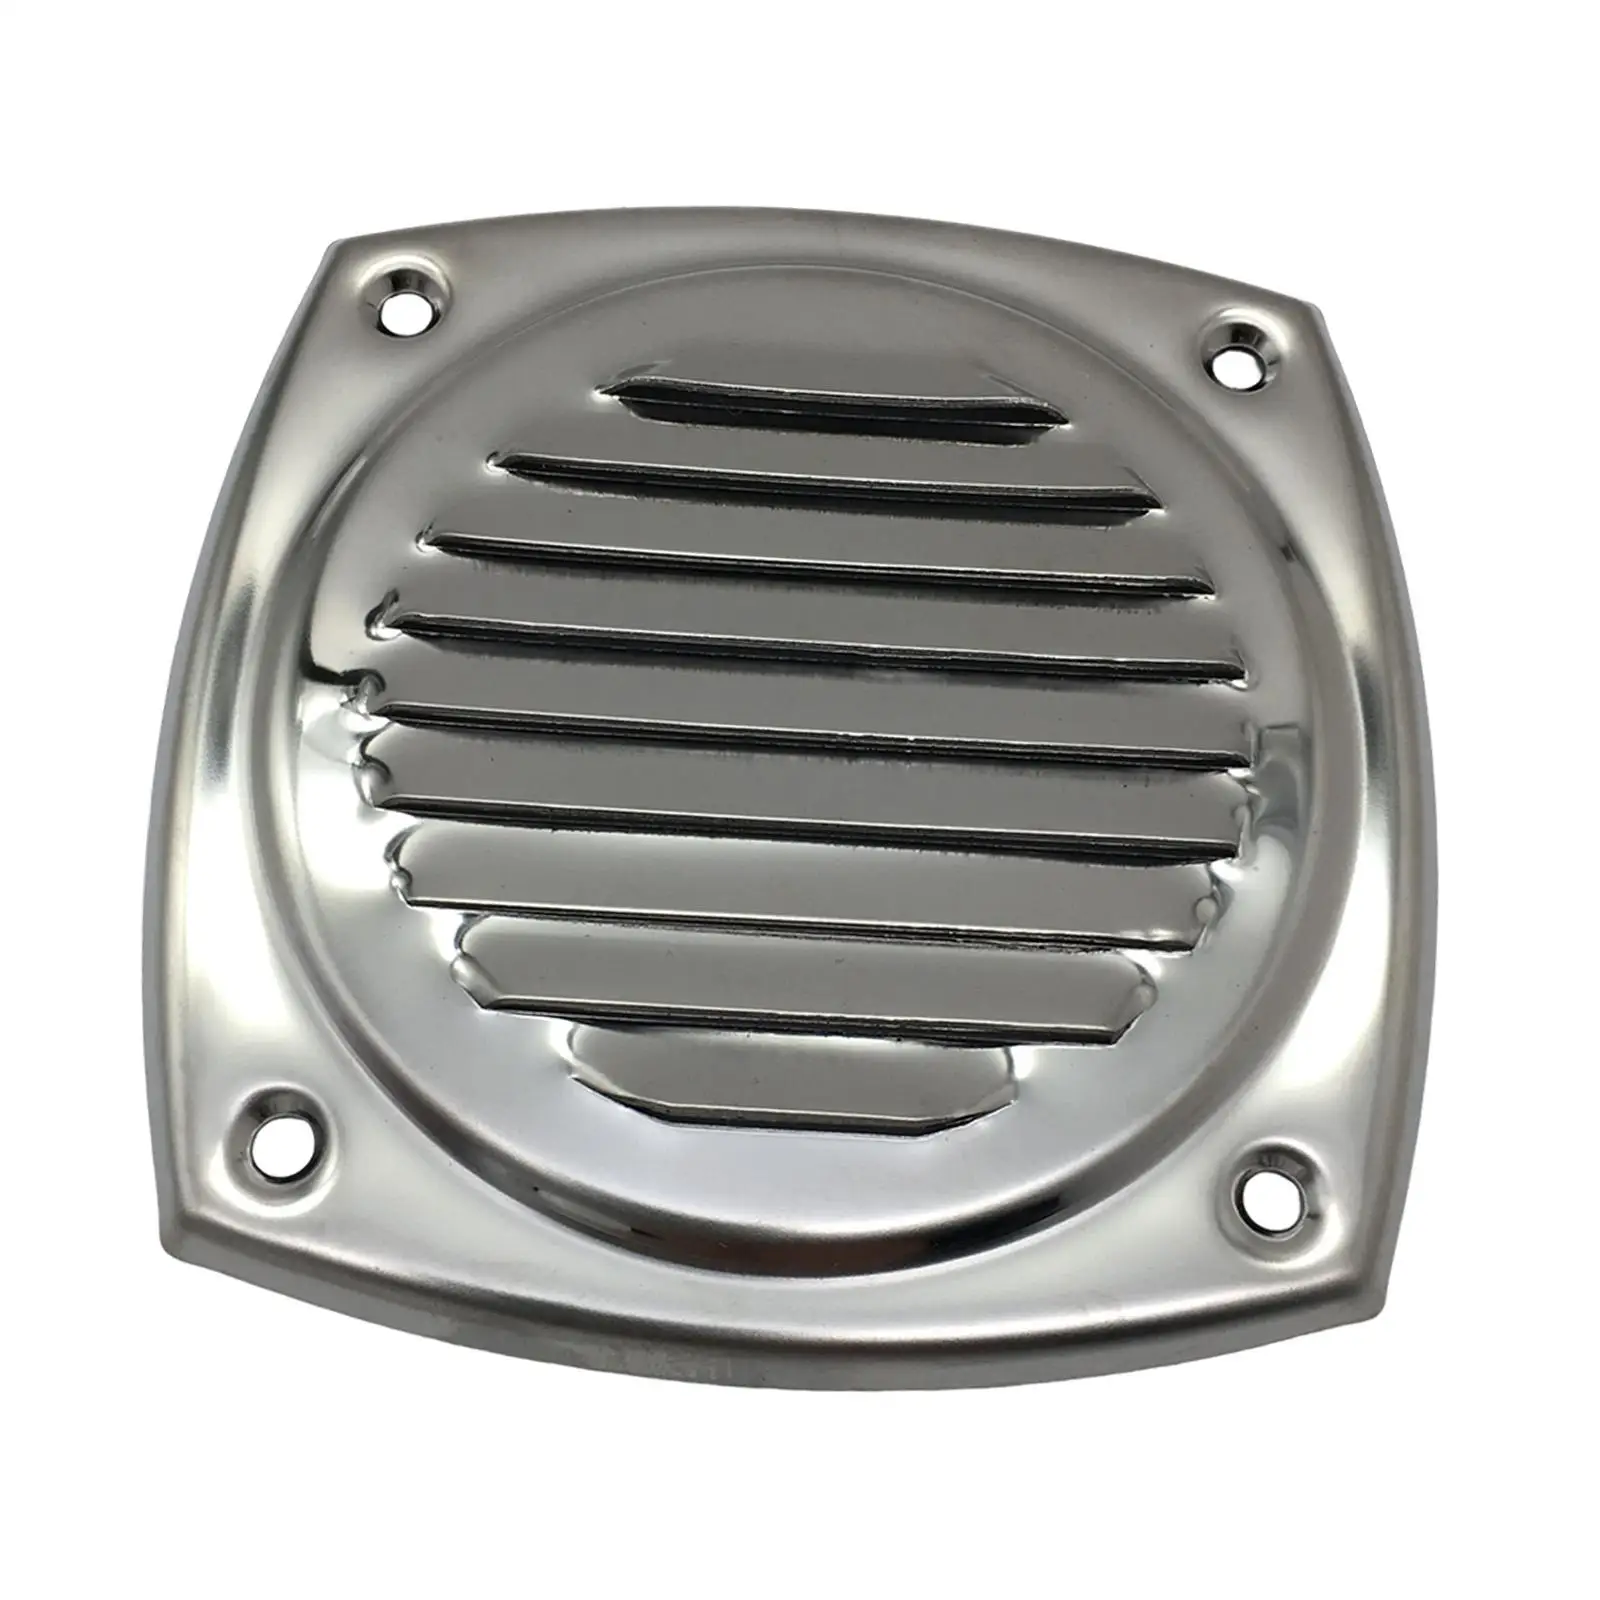 Air Vent Grille Venting Panel Cover Vent Hood for Bedroom RV Yacht